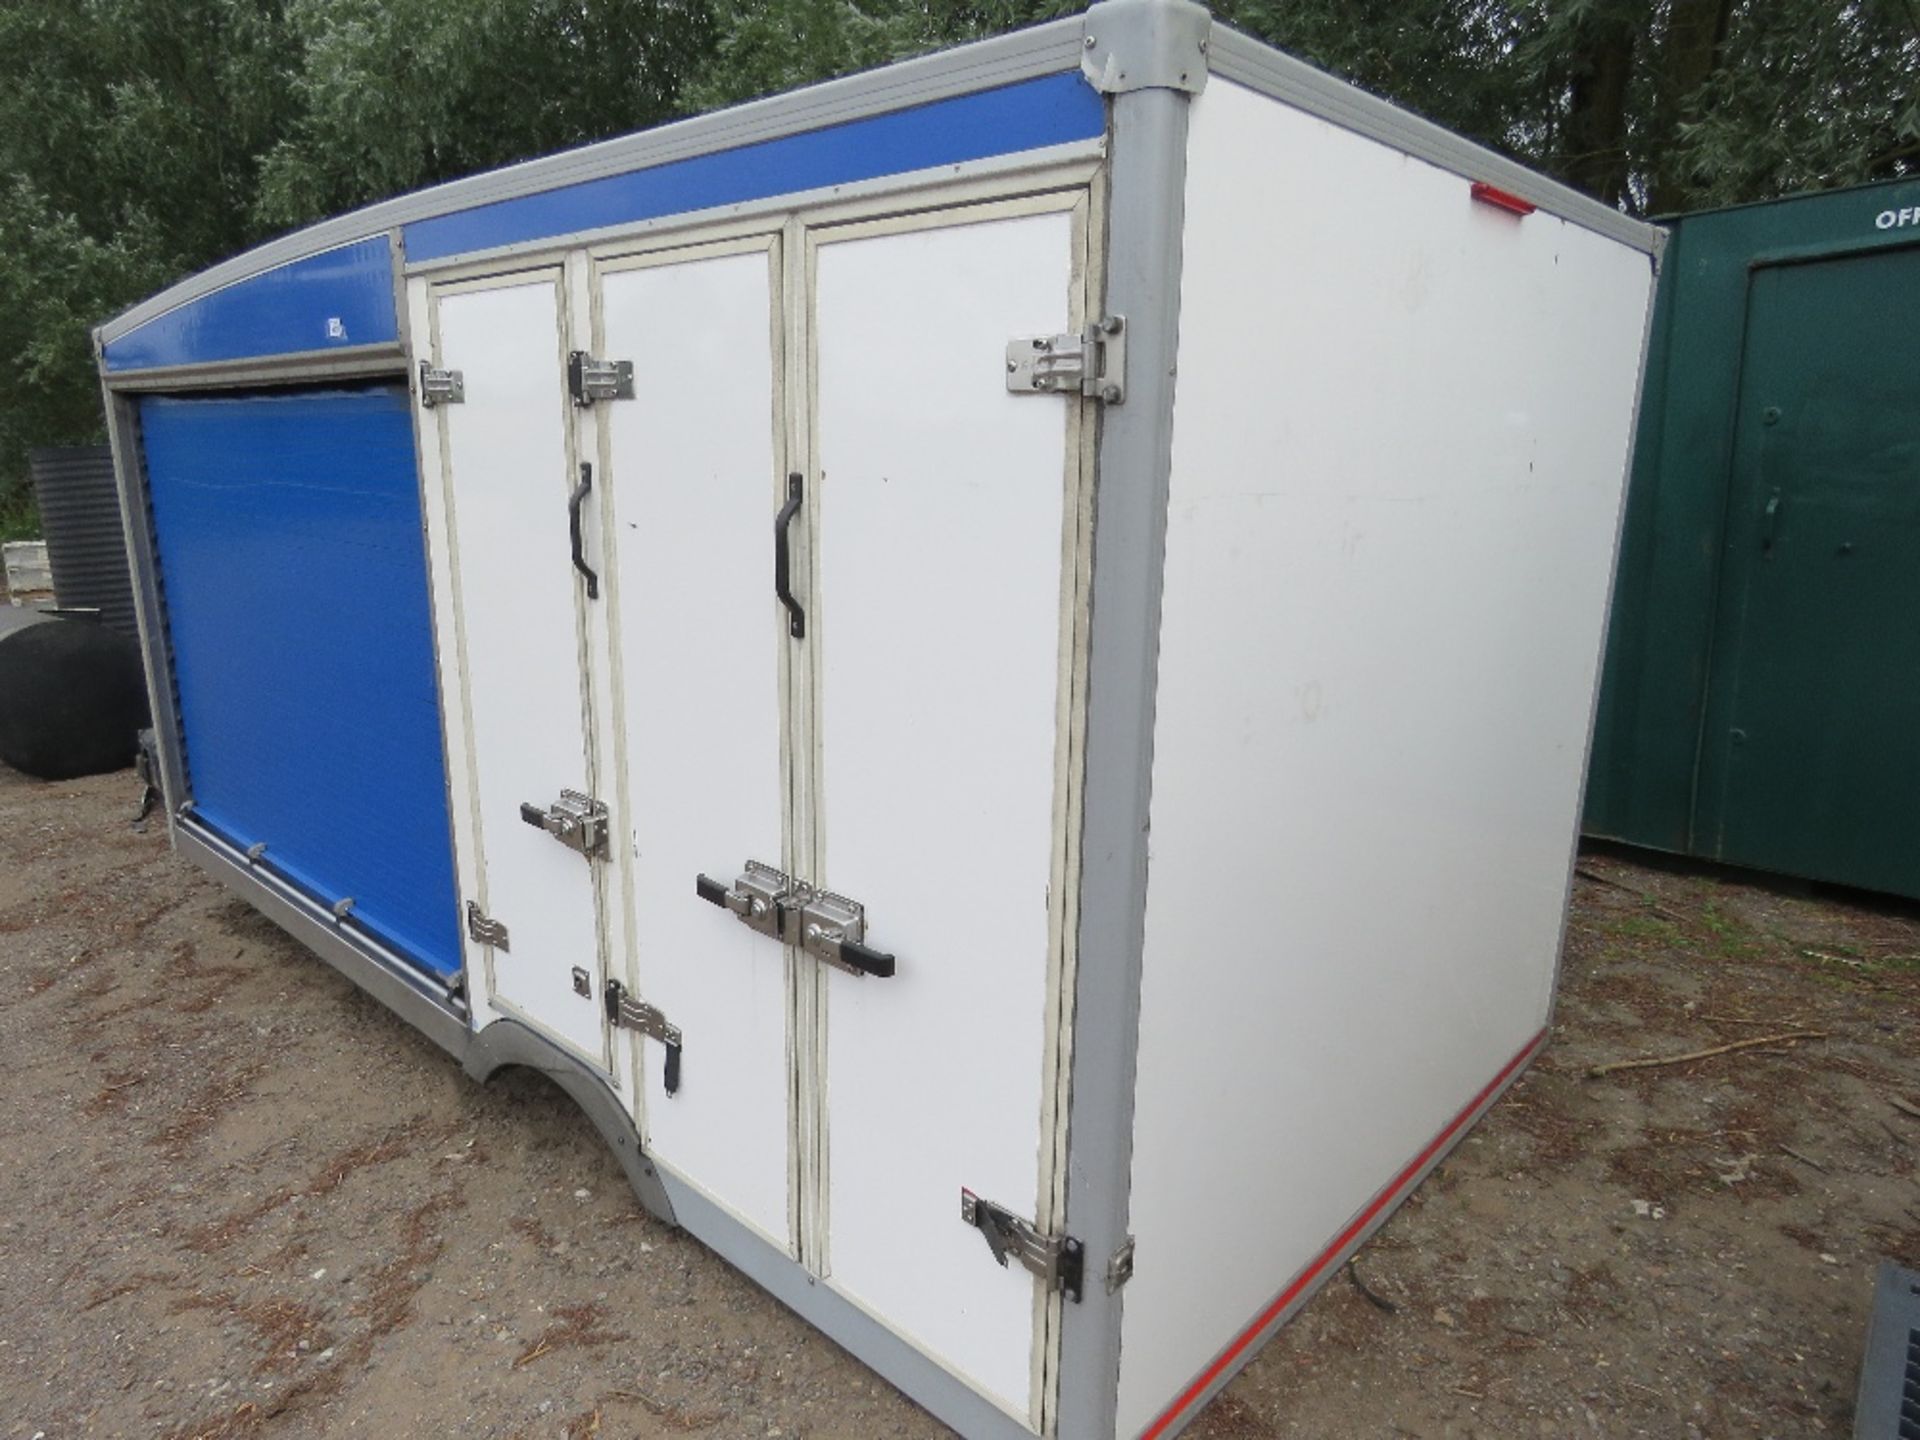 TEMPERATURE CONTROLLED VAN BODY WITH ROLLER SHUTTER SIDES, 13FT LENGTH APPROX. - Image 2 of 8